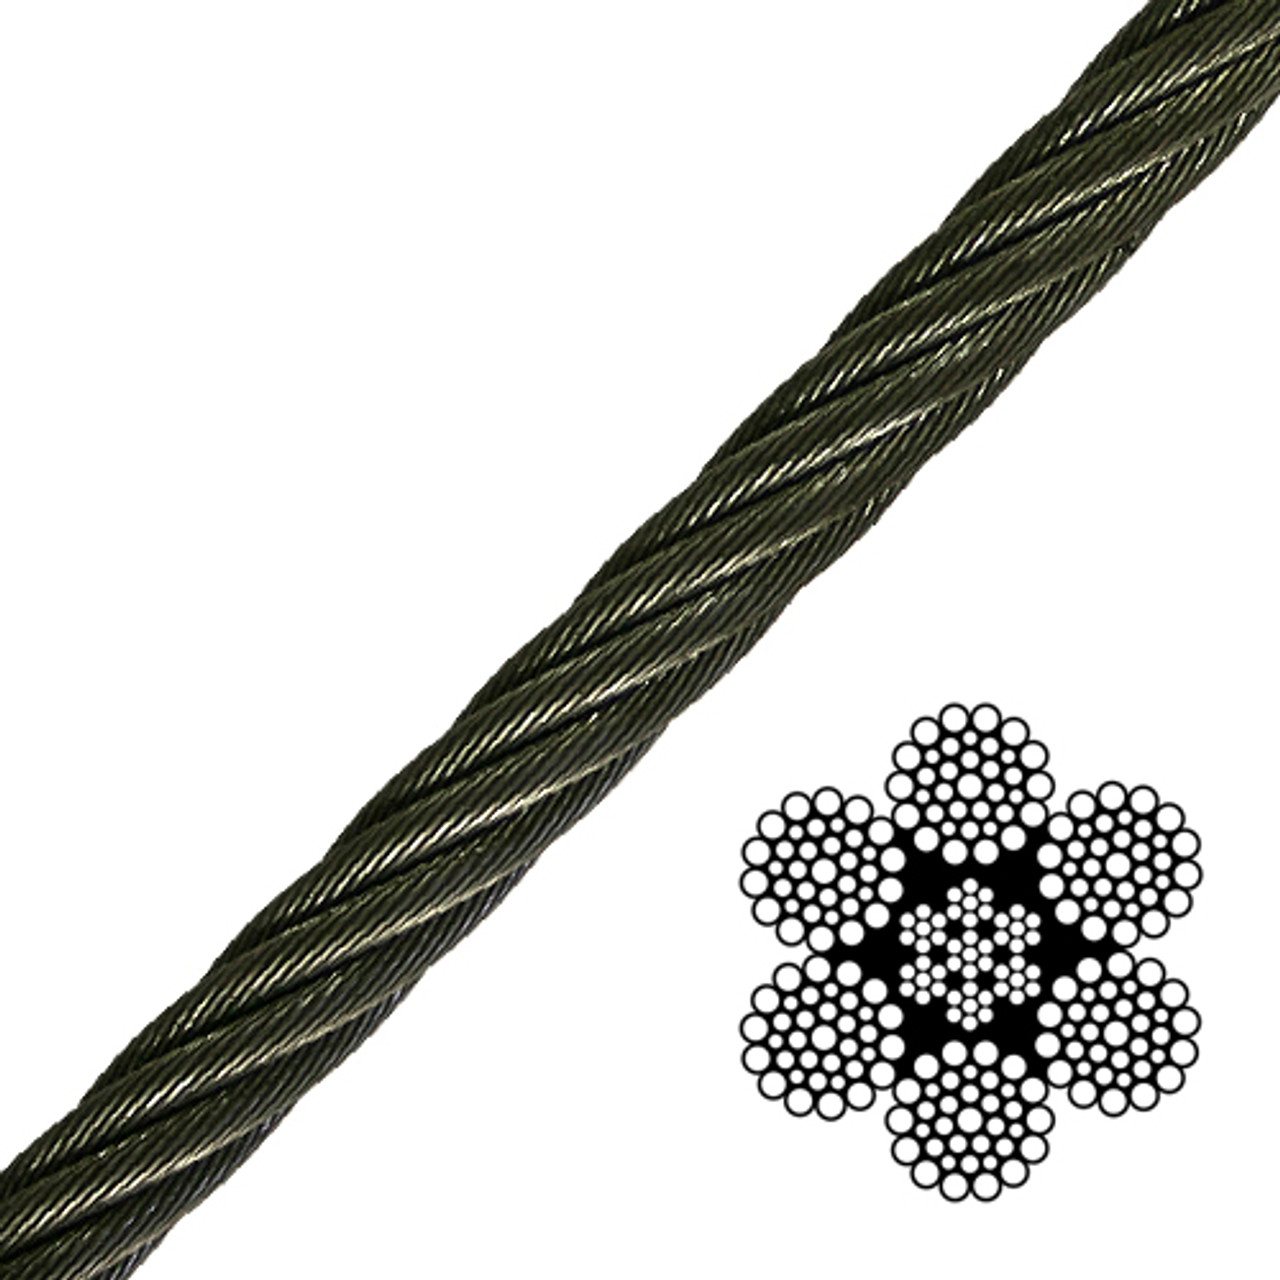 https://cdn11.bigcommerce.com/s-11cqjpjngs/images/stencil/1280x1280/products/66986/82974/1-1-8-6x36-class-wire-rope-130000-lbs-breaking-strength-41__56941.1649114951.jpg?c=1